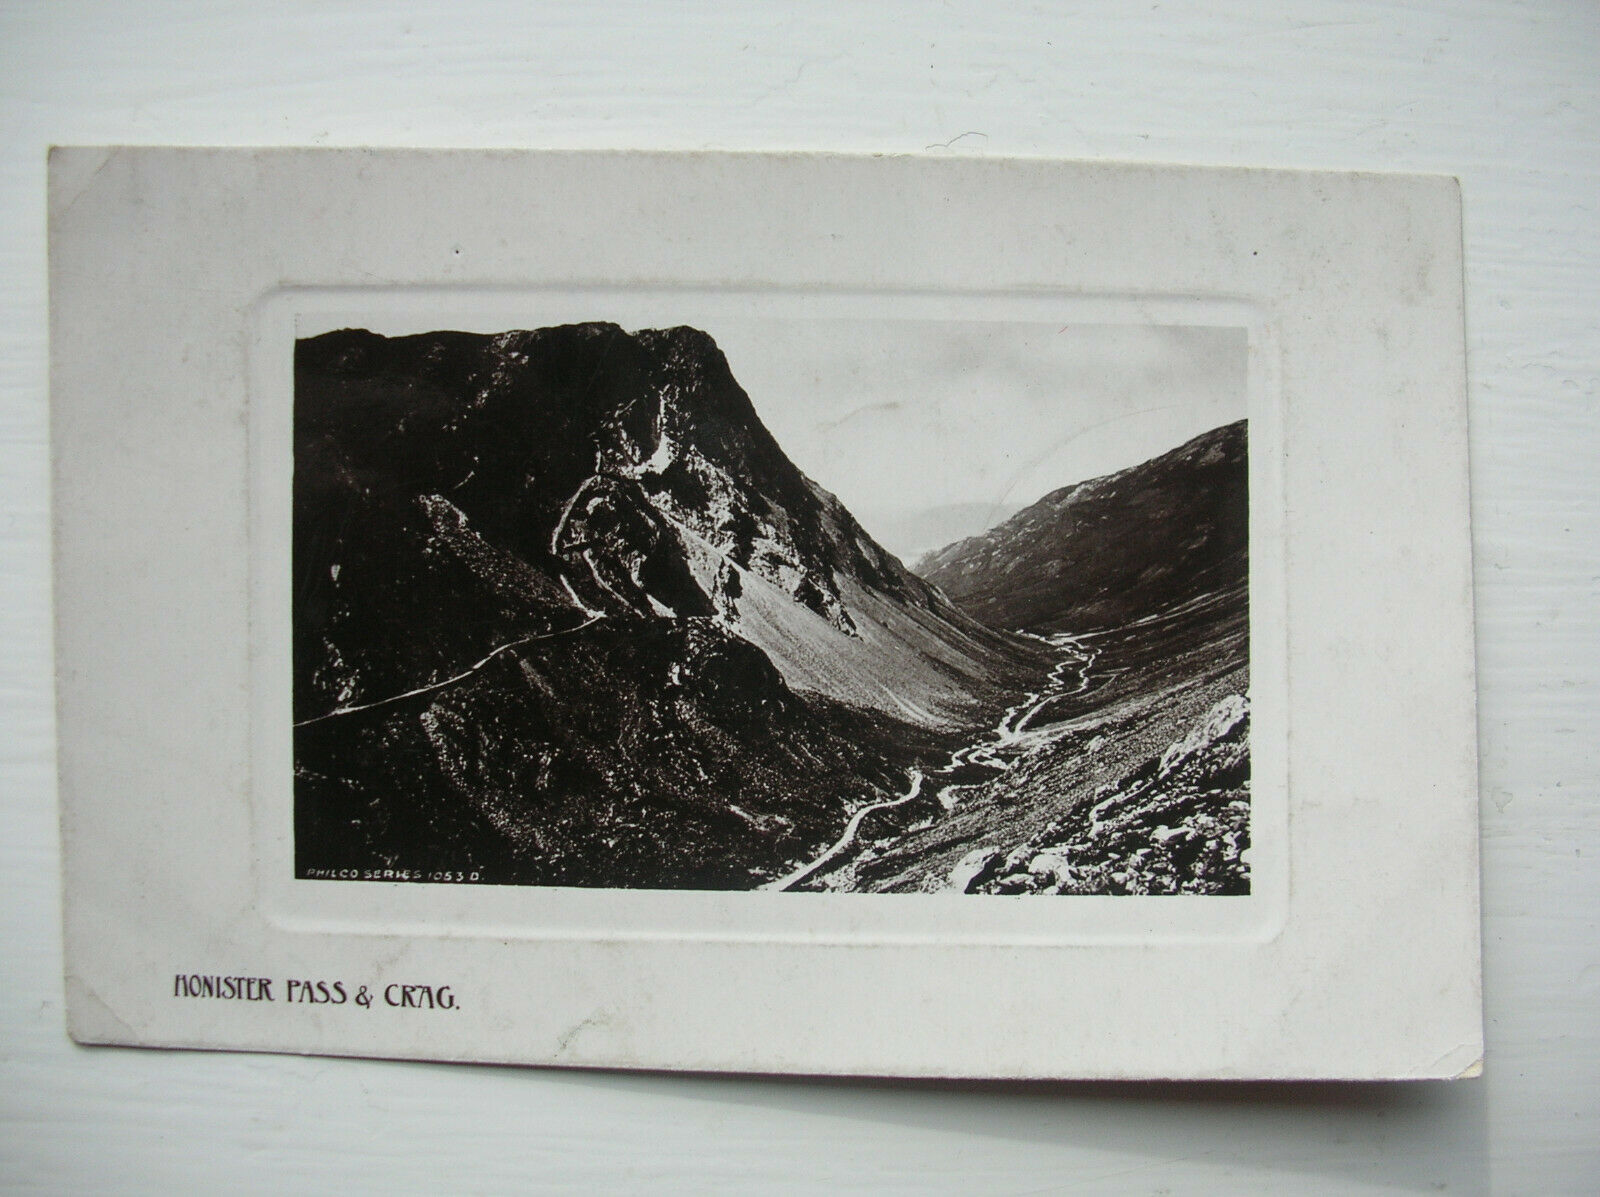 House Clearance - Honister Pass & Crag. (Philco - 1912)